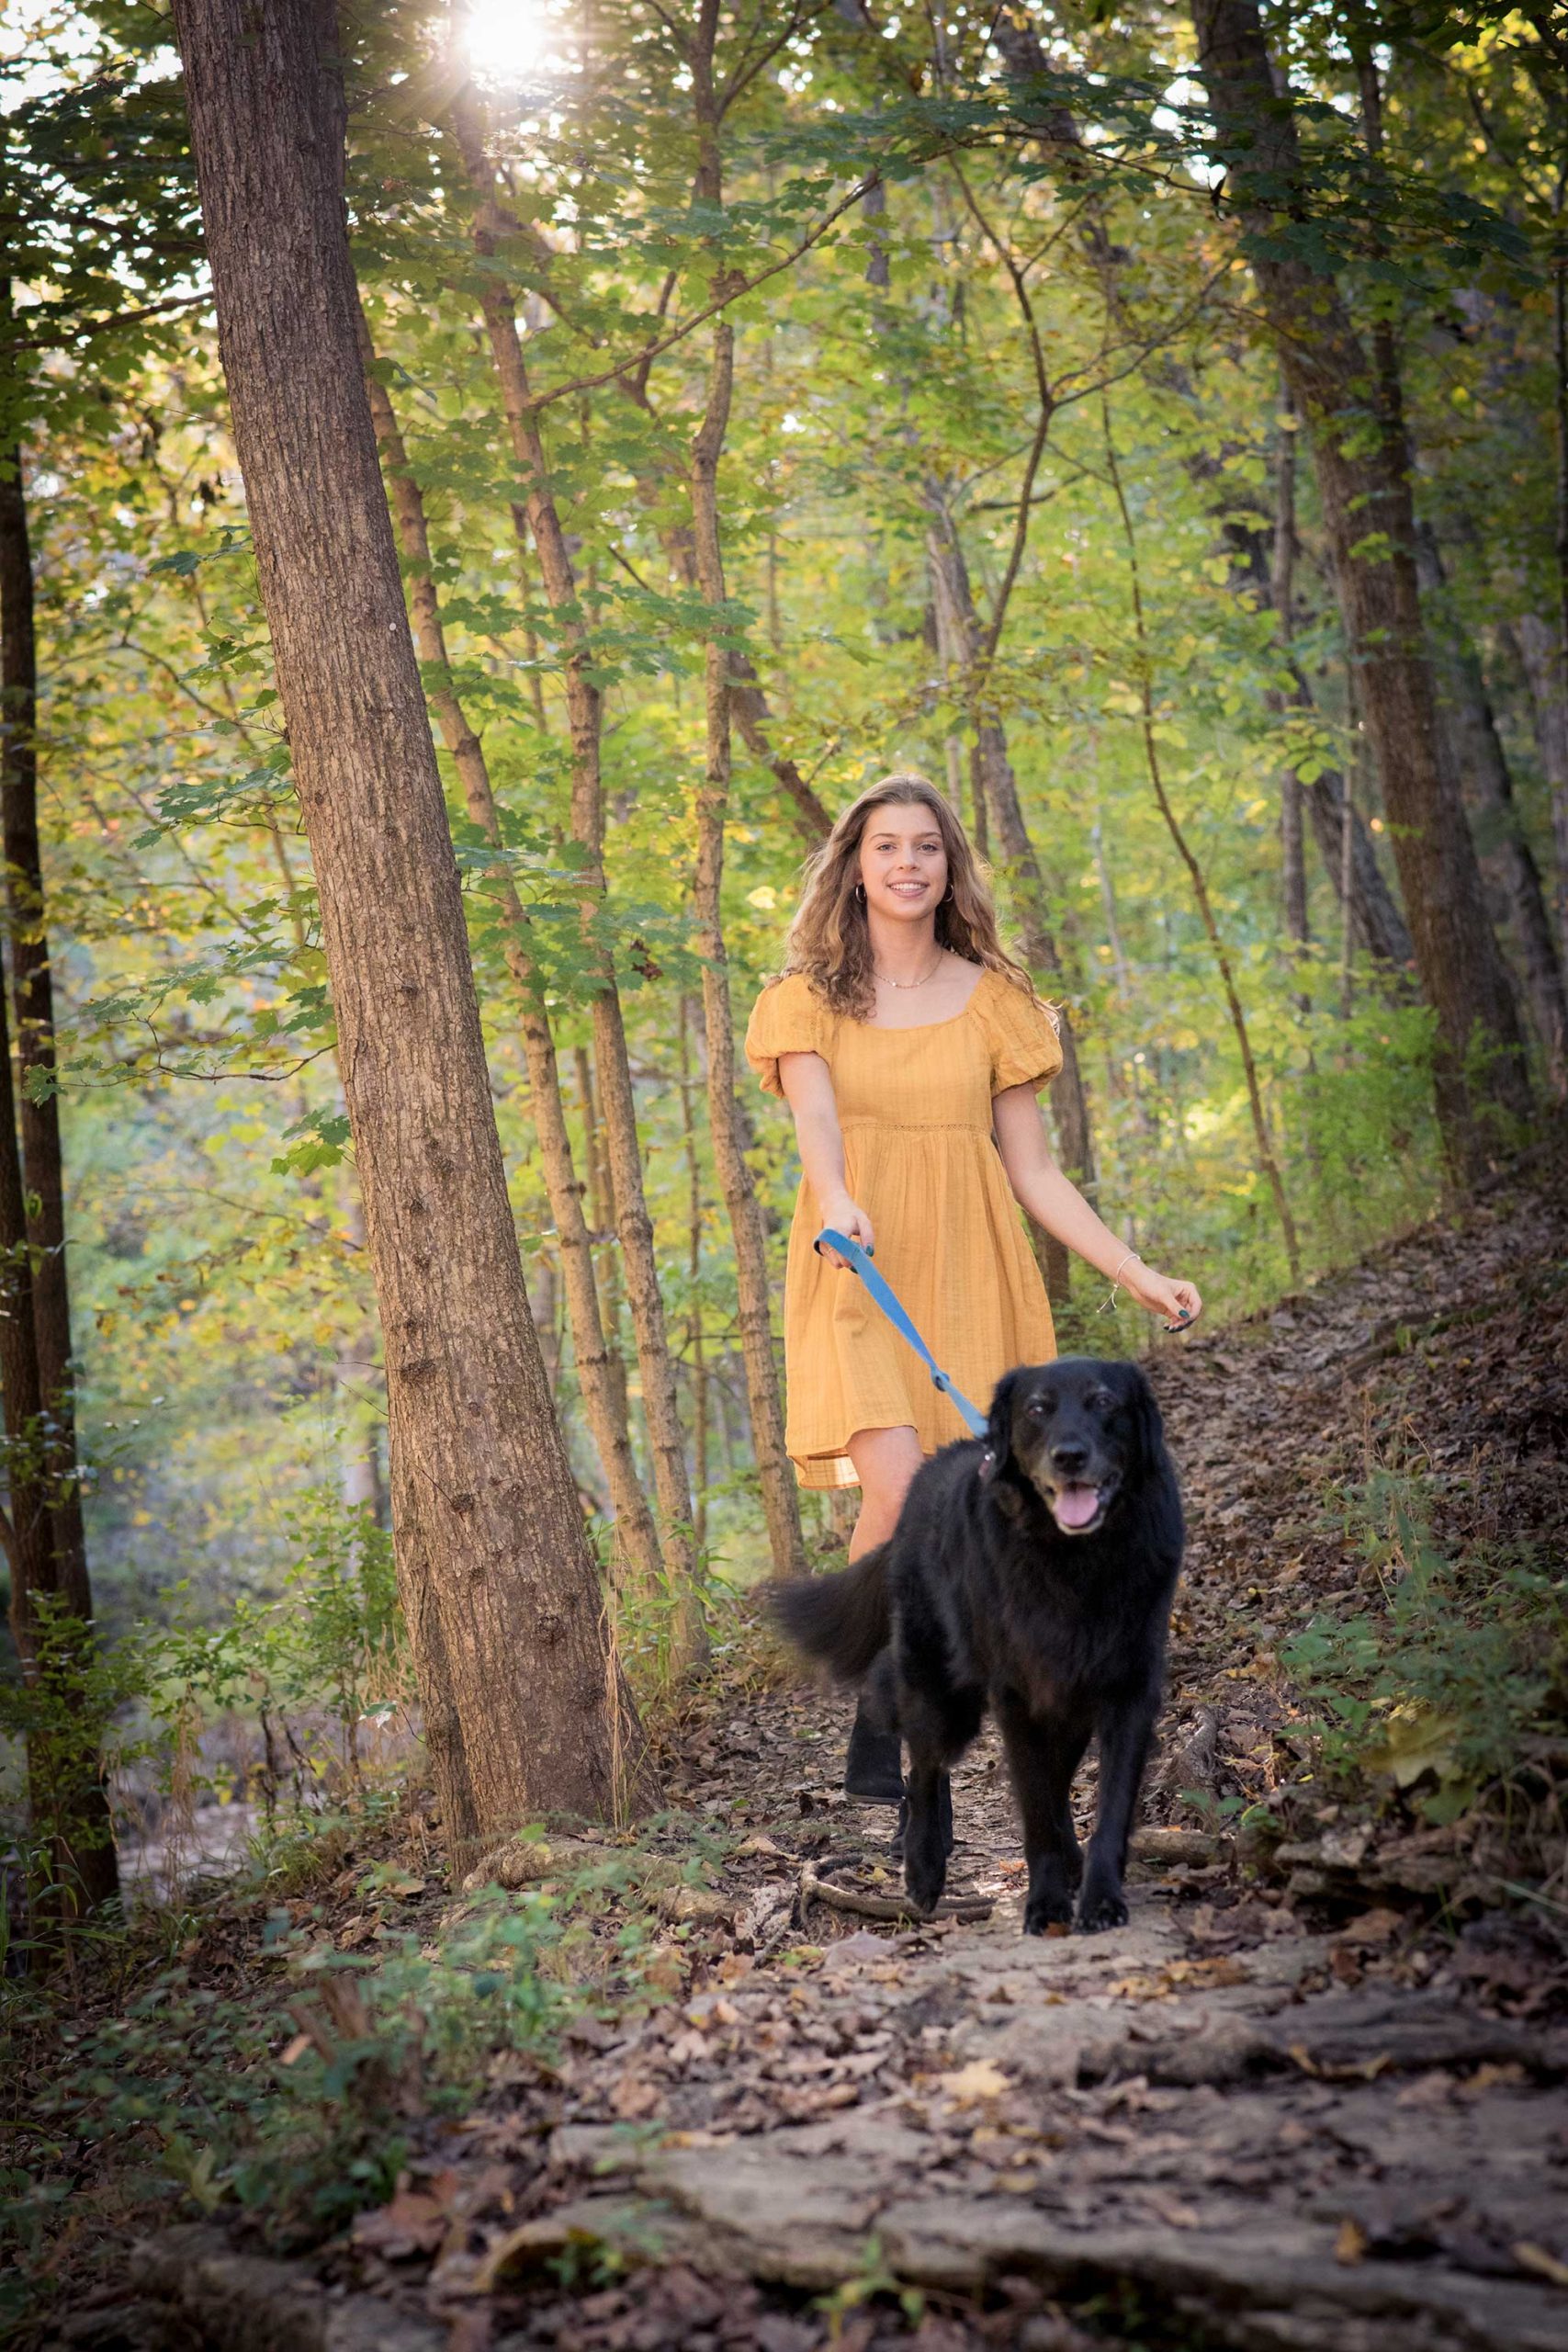 Senior Girl in Woods with dog during Autumn.